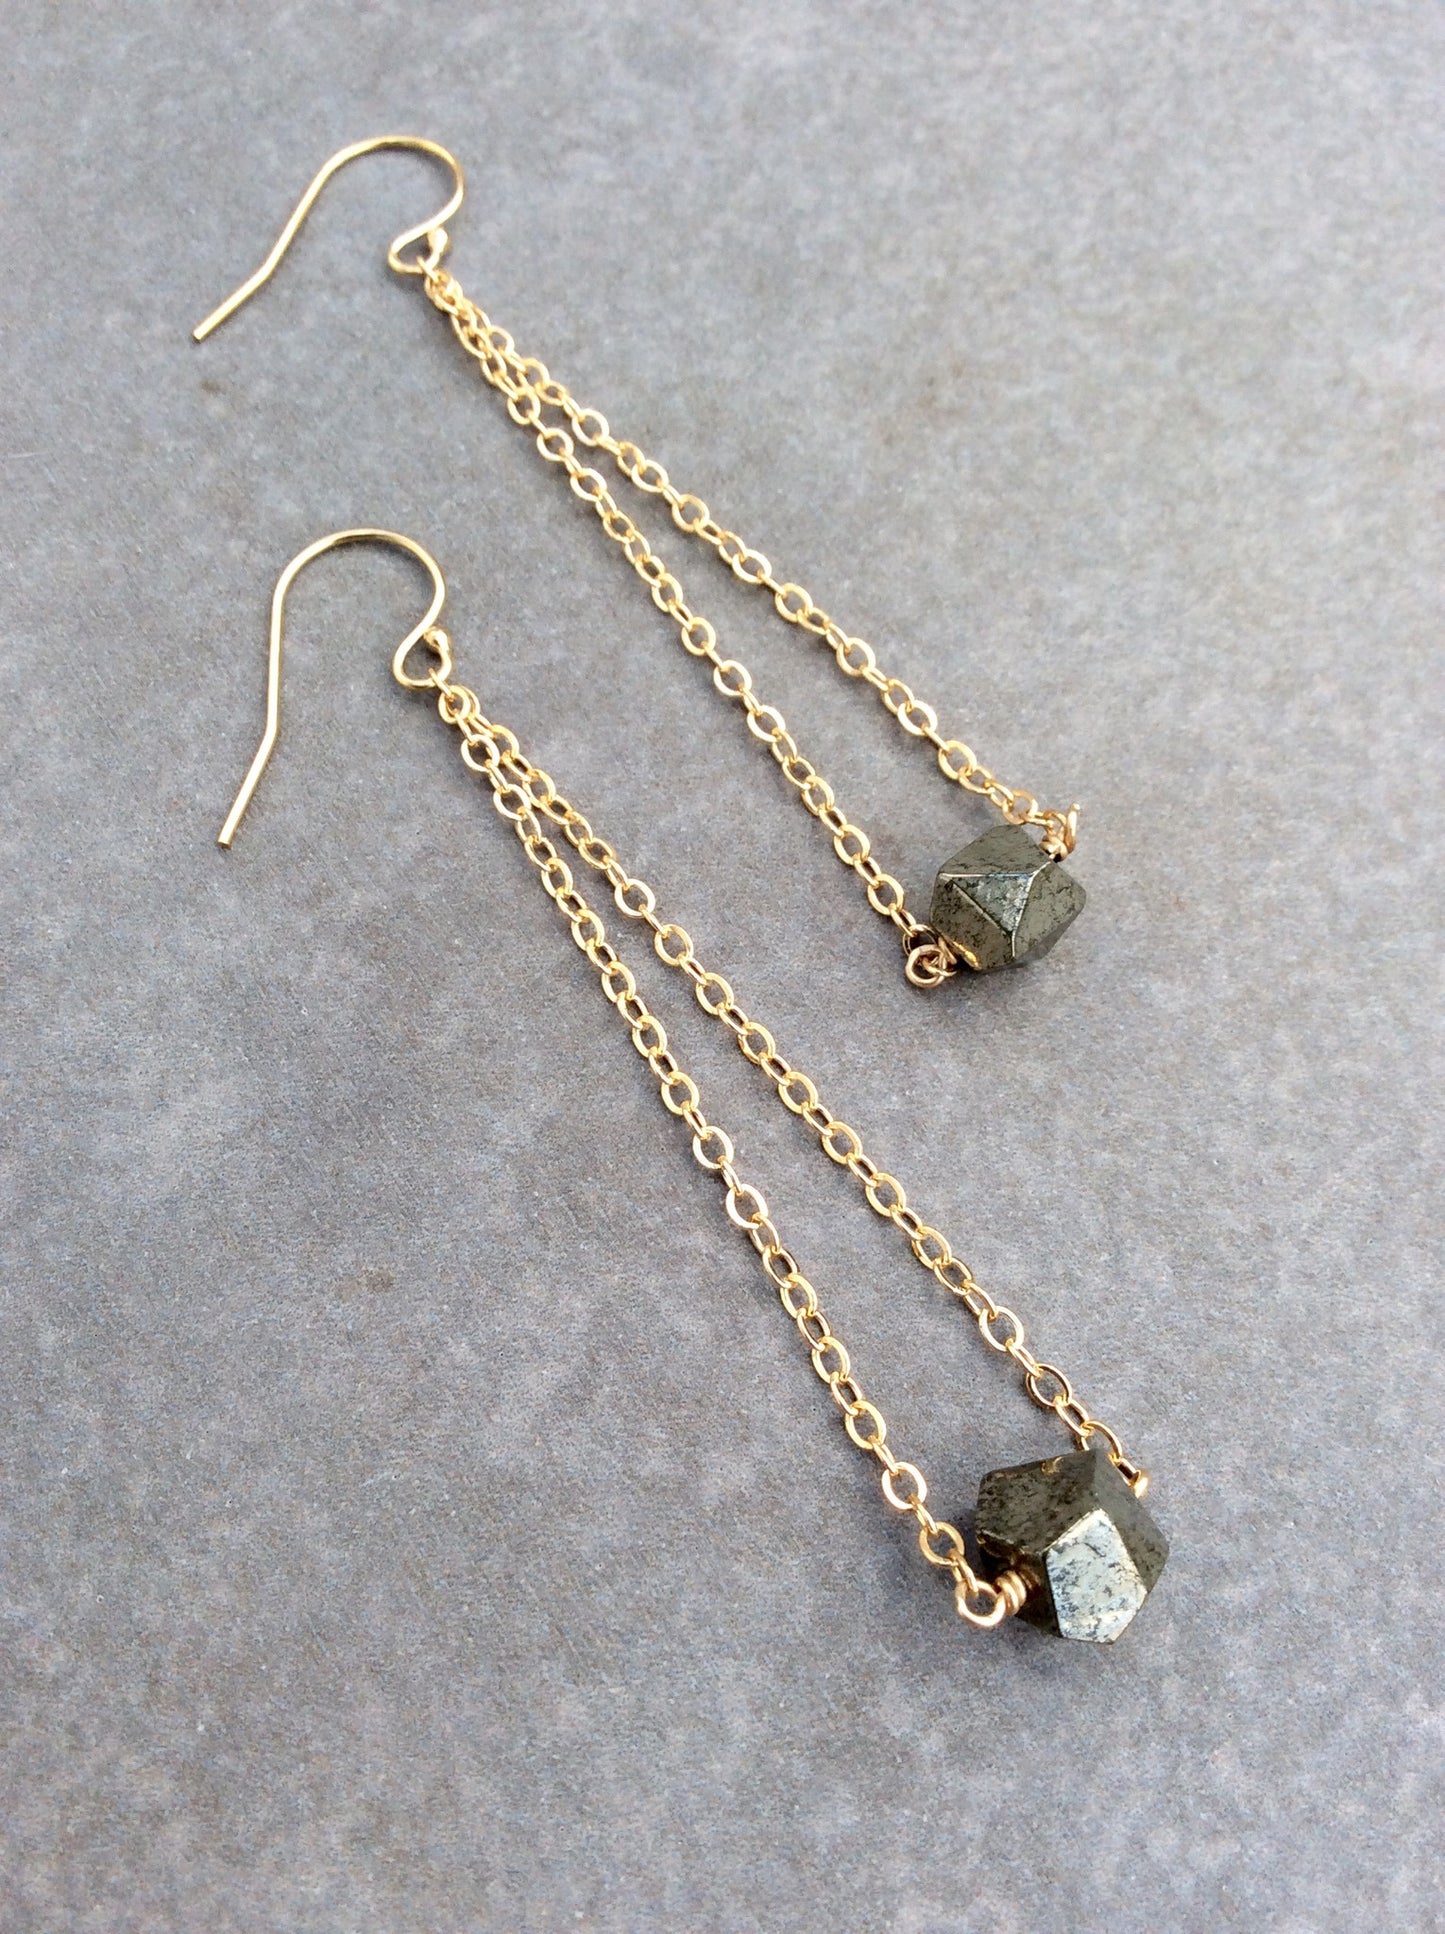 Round Faceted a Pyrite Chandelier Earrings